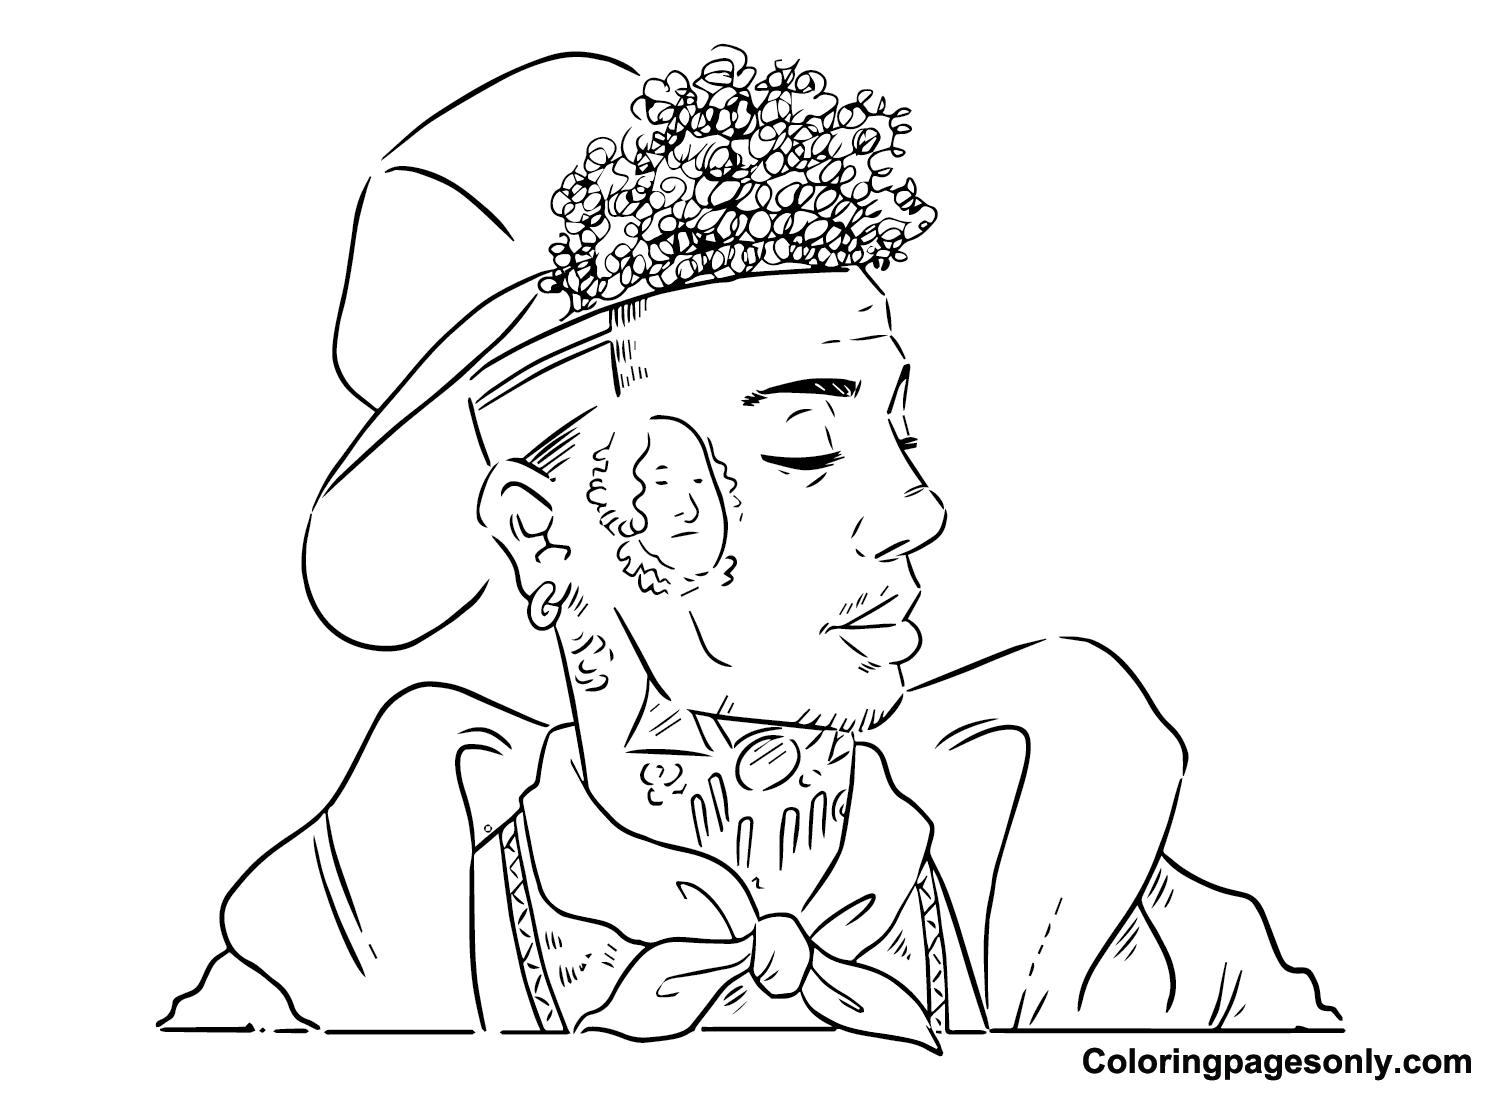 Amazing Blueface Coloring Page